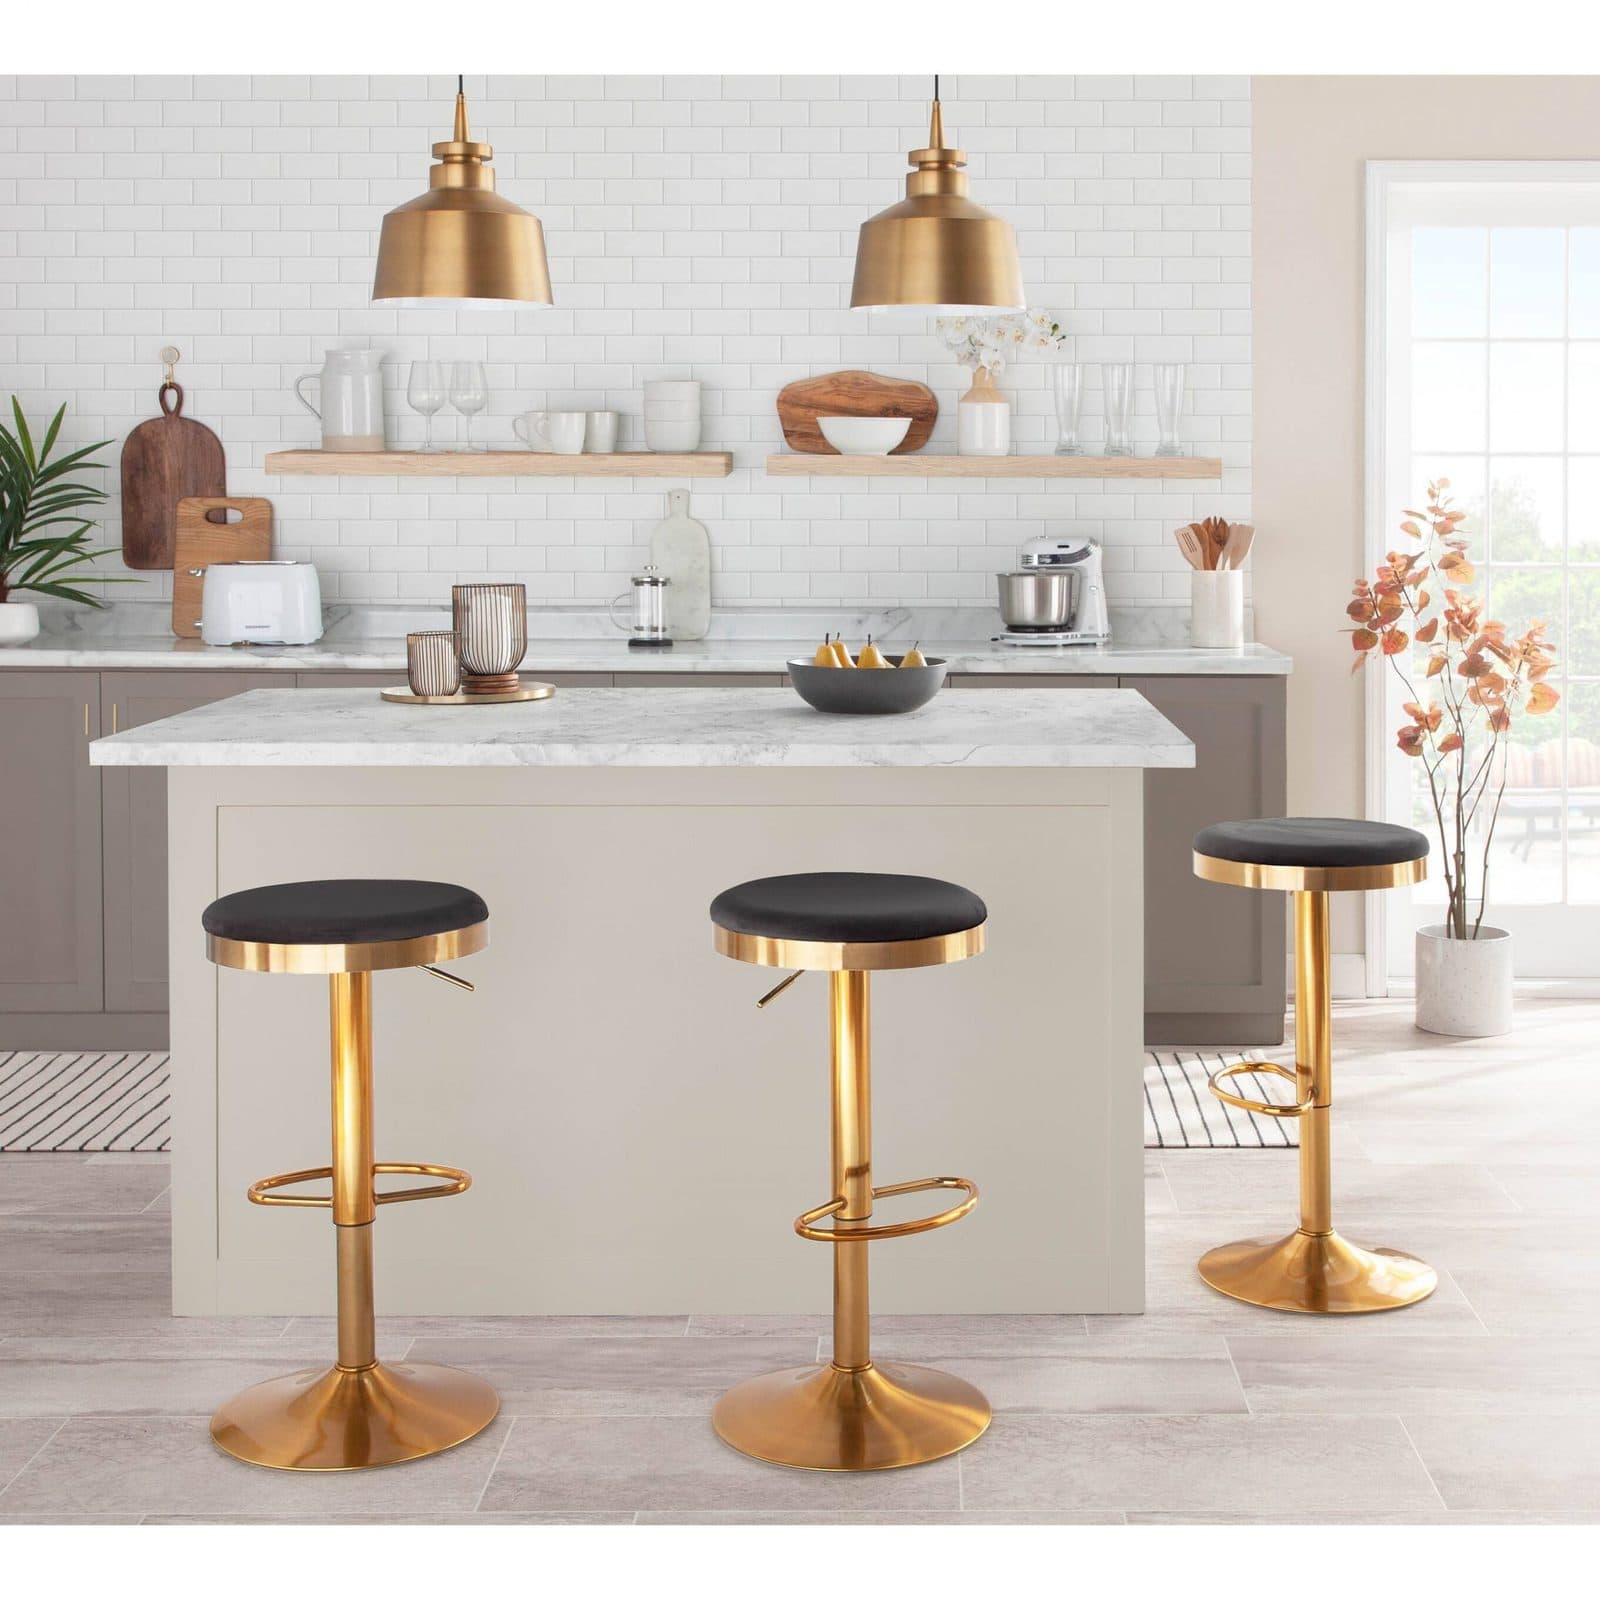 15 Best Stools For Kitchen Island, Best Stool Height For Kitchen Island